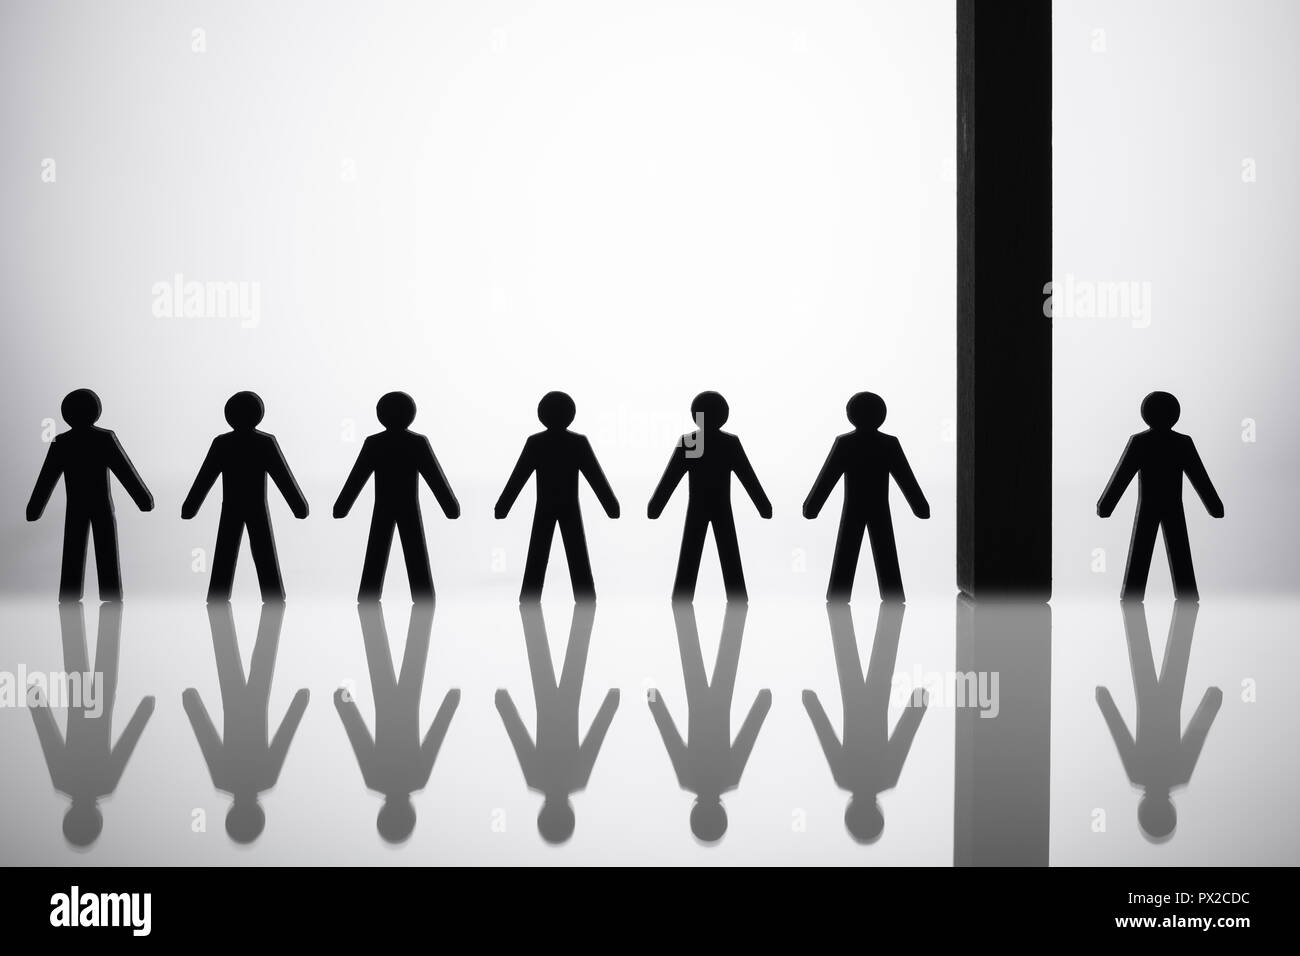 Human Figure Separated By Block From Others Standing In A Row Stock Photo